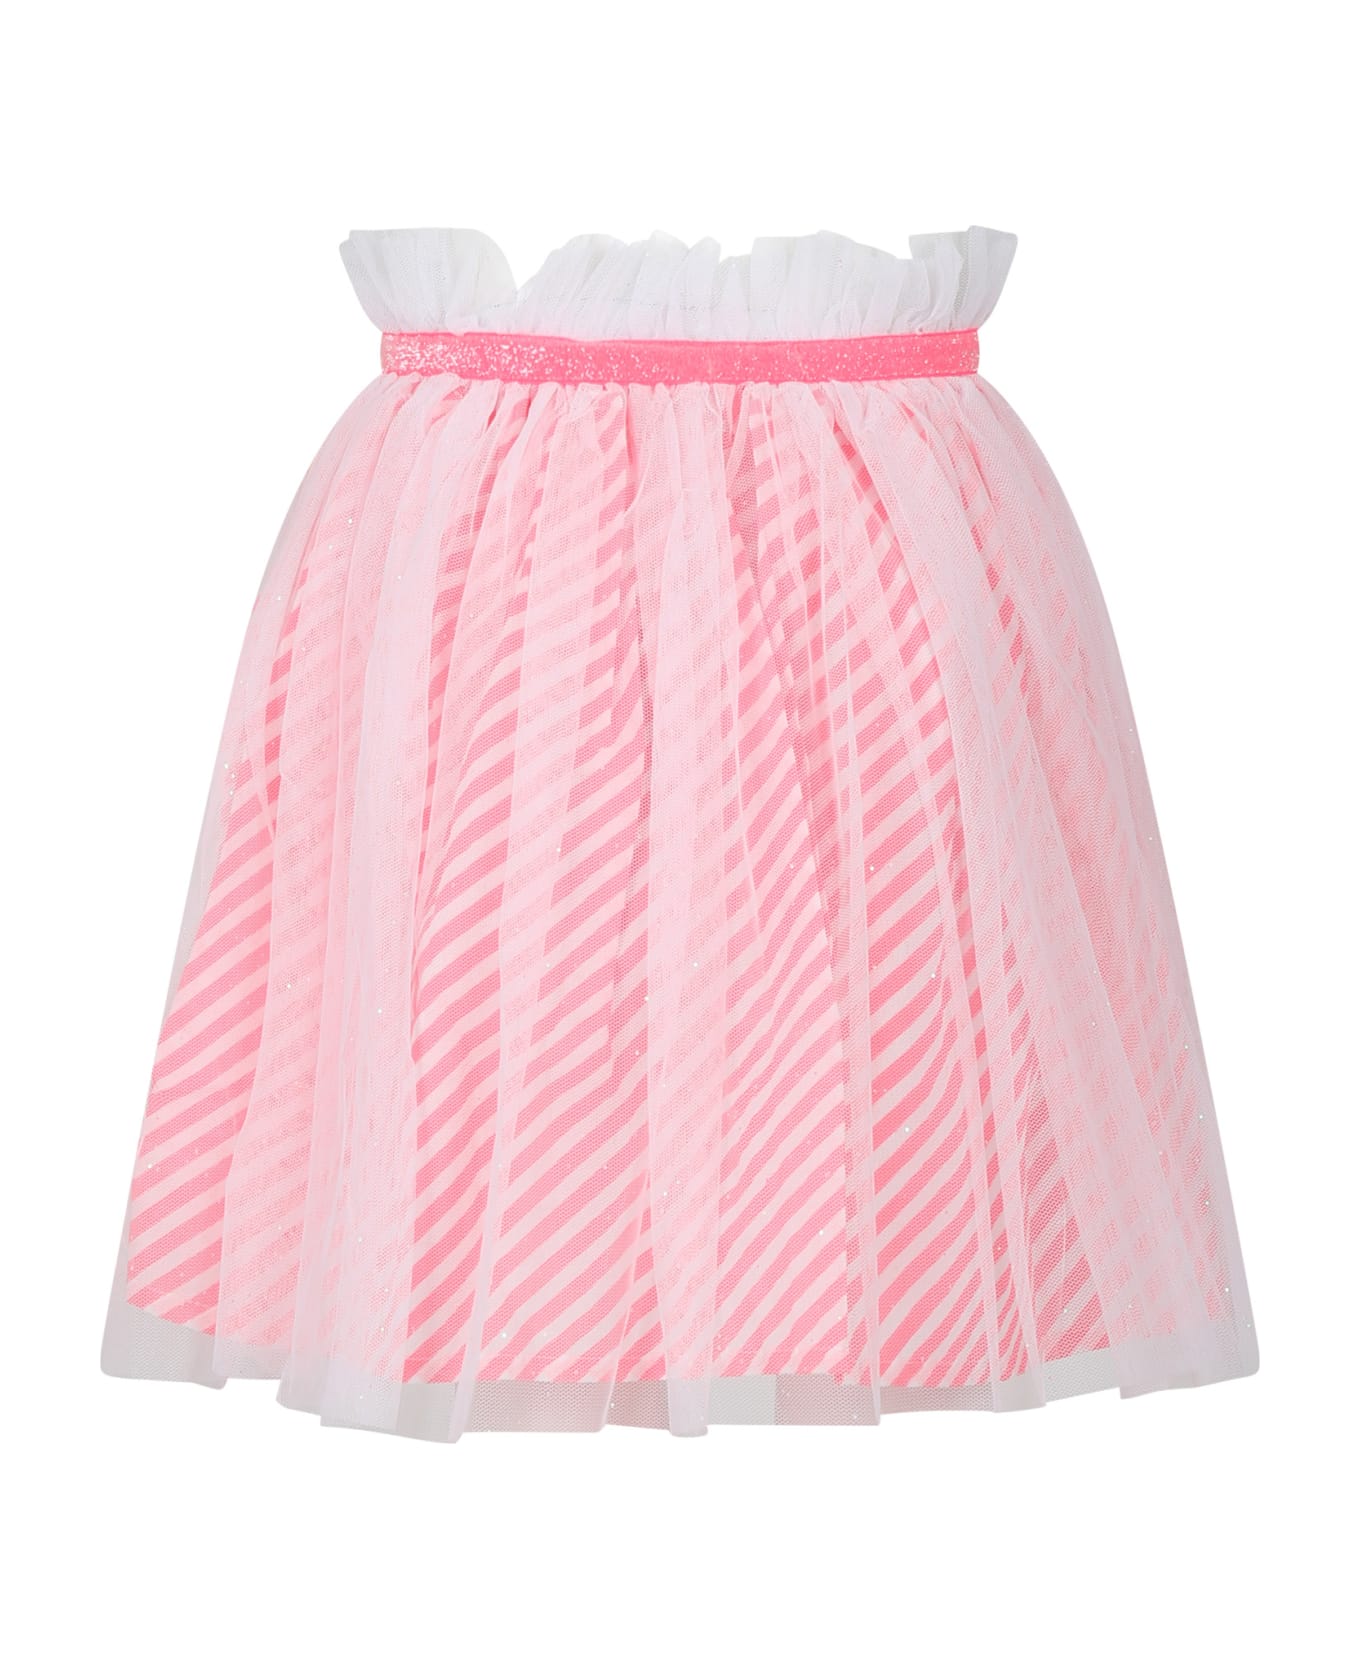 Billieblush White Skirt For Girl With Pattern - Pink